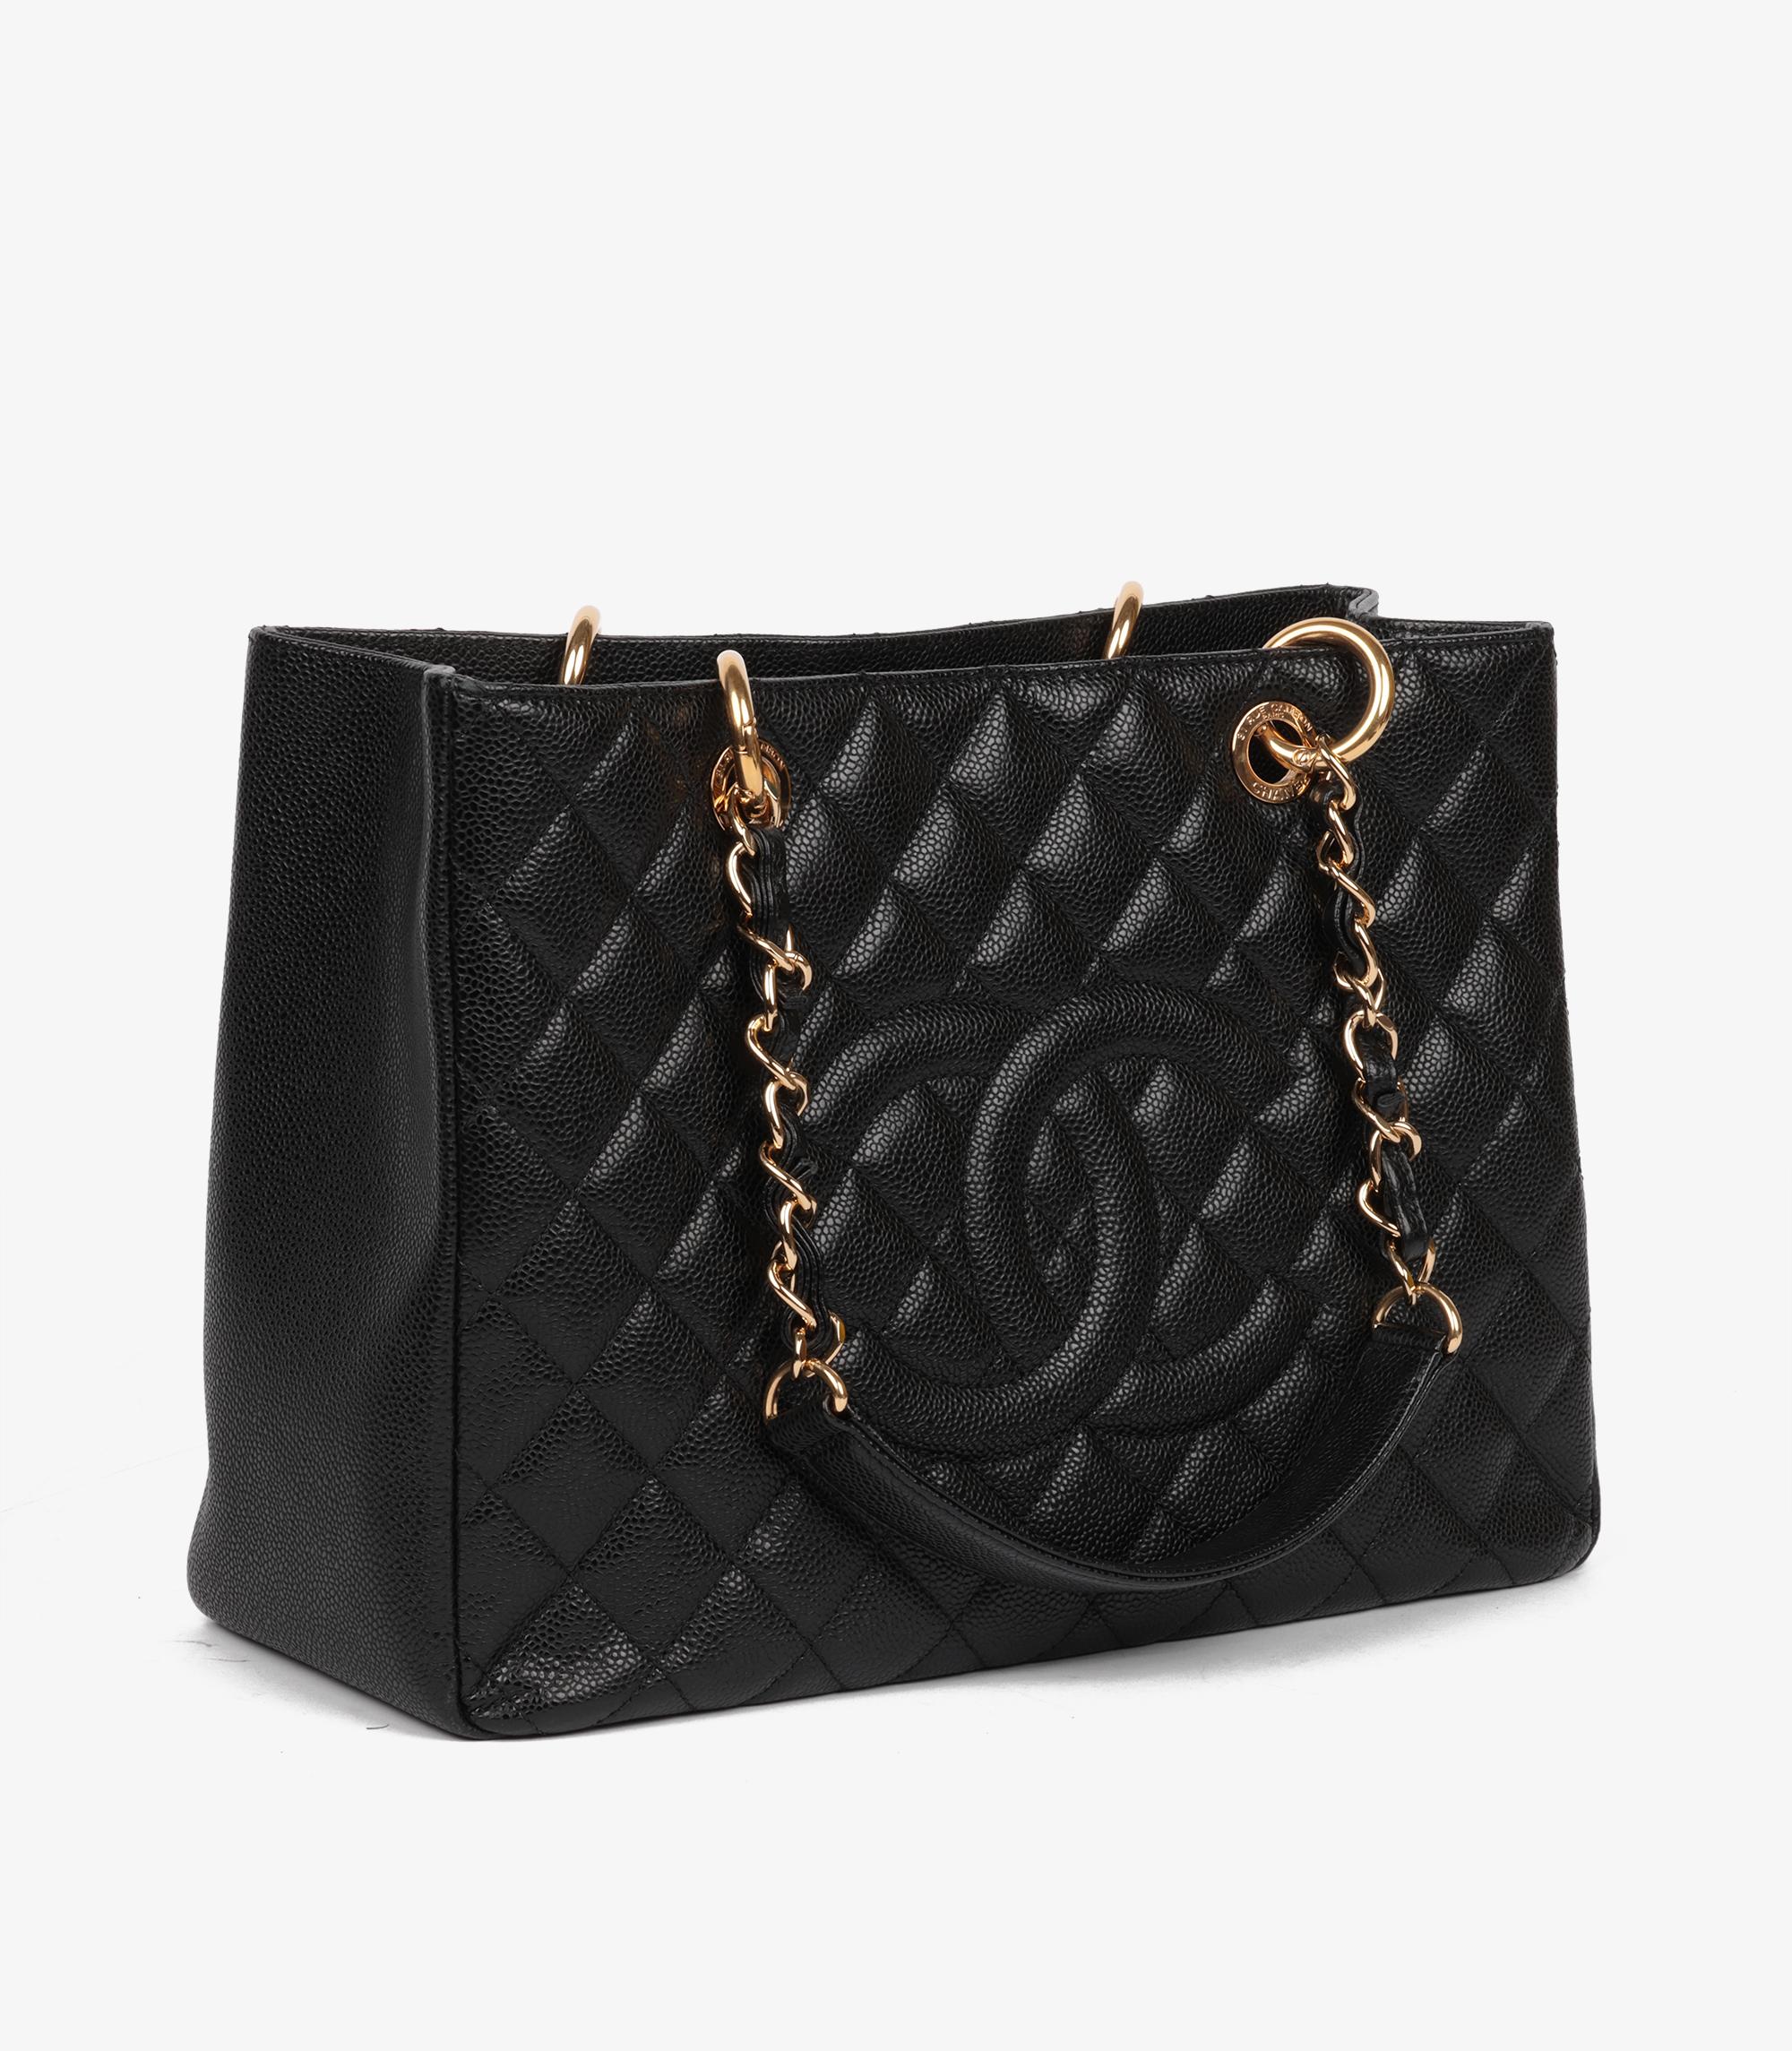 Chanel Black Quilted Caviar Leather Grand Shopping Tote GST In Excellent Condition For Sale In Bishop's Stortford, Hertfordshire